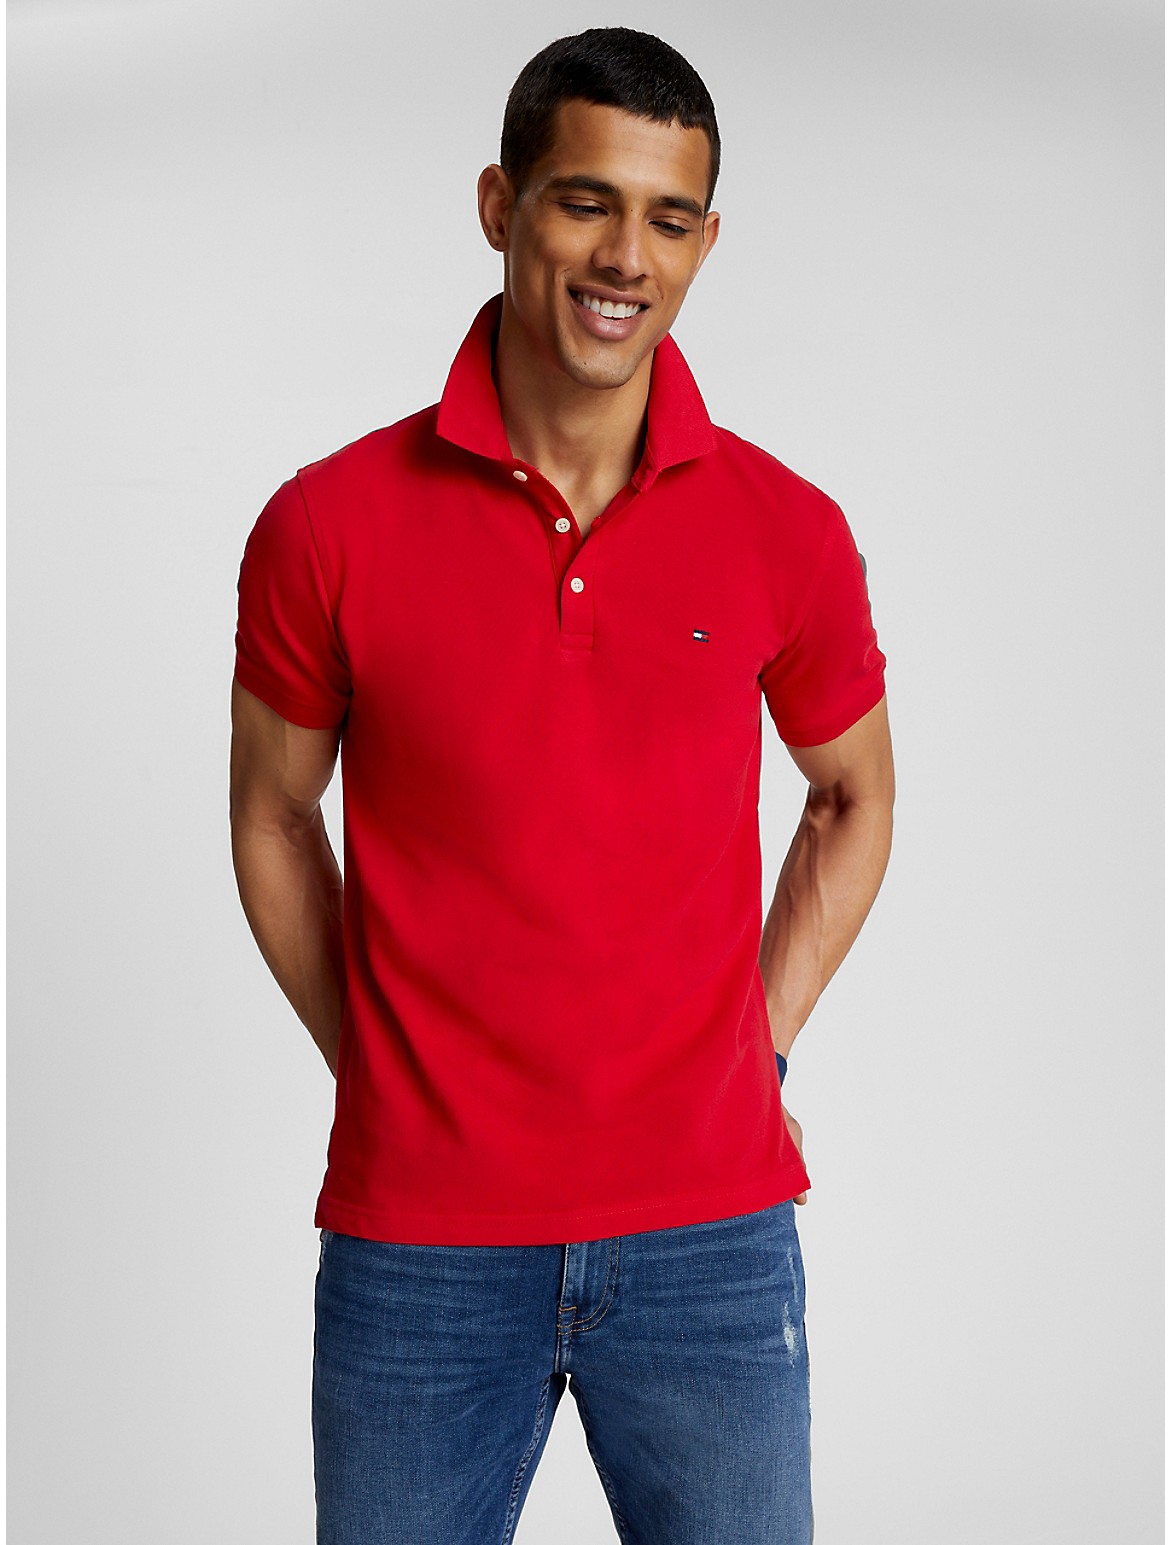 Tommy Hilfiger Men's Slim Fit Tommy Polo - Red - XXL